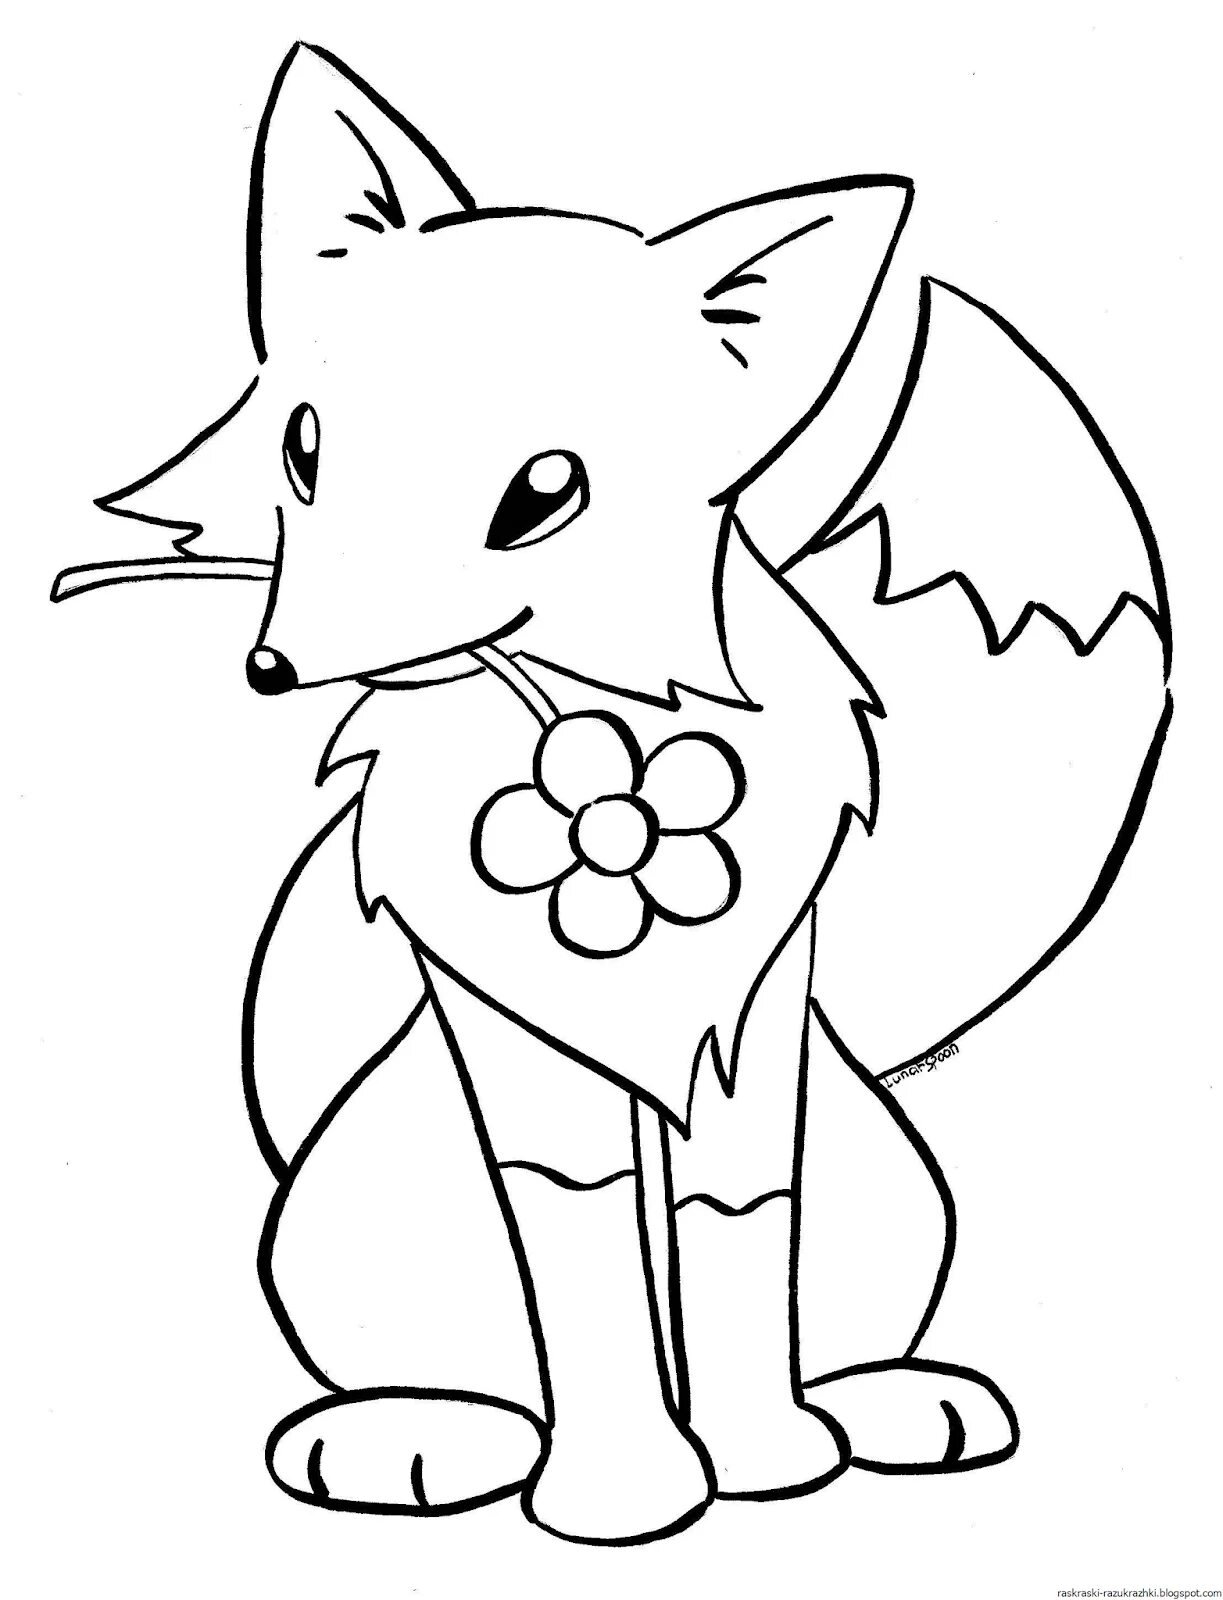 Coloring book smart fox for kids